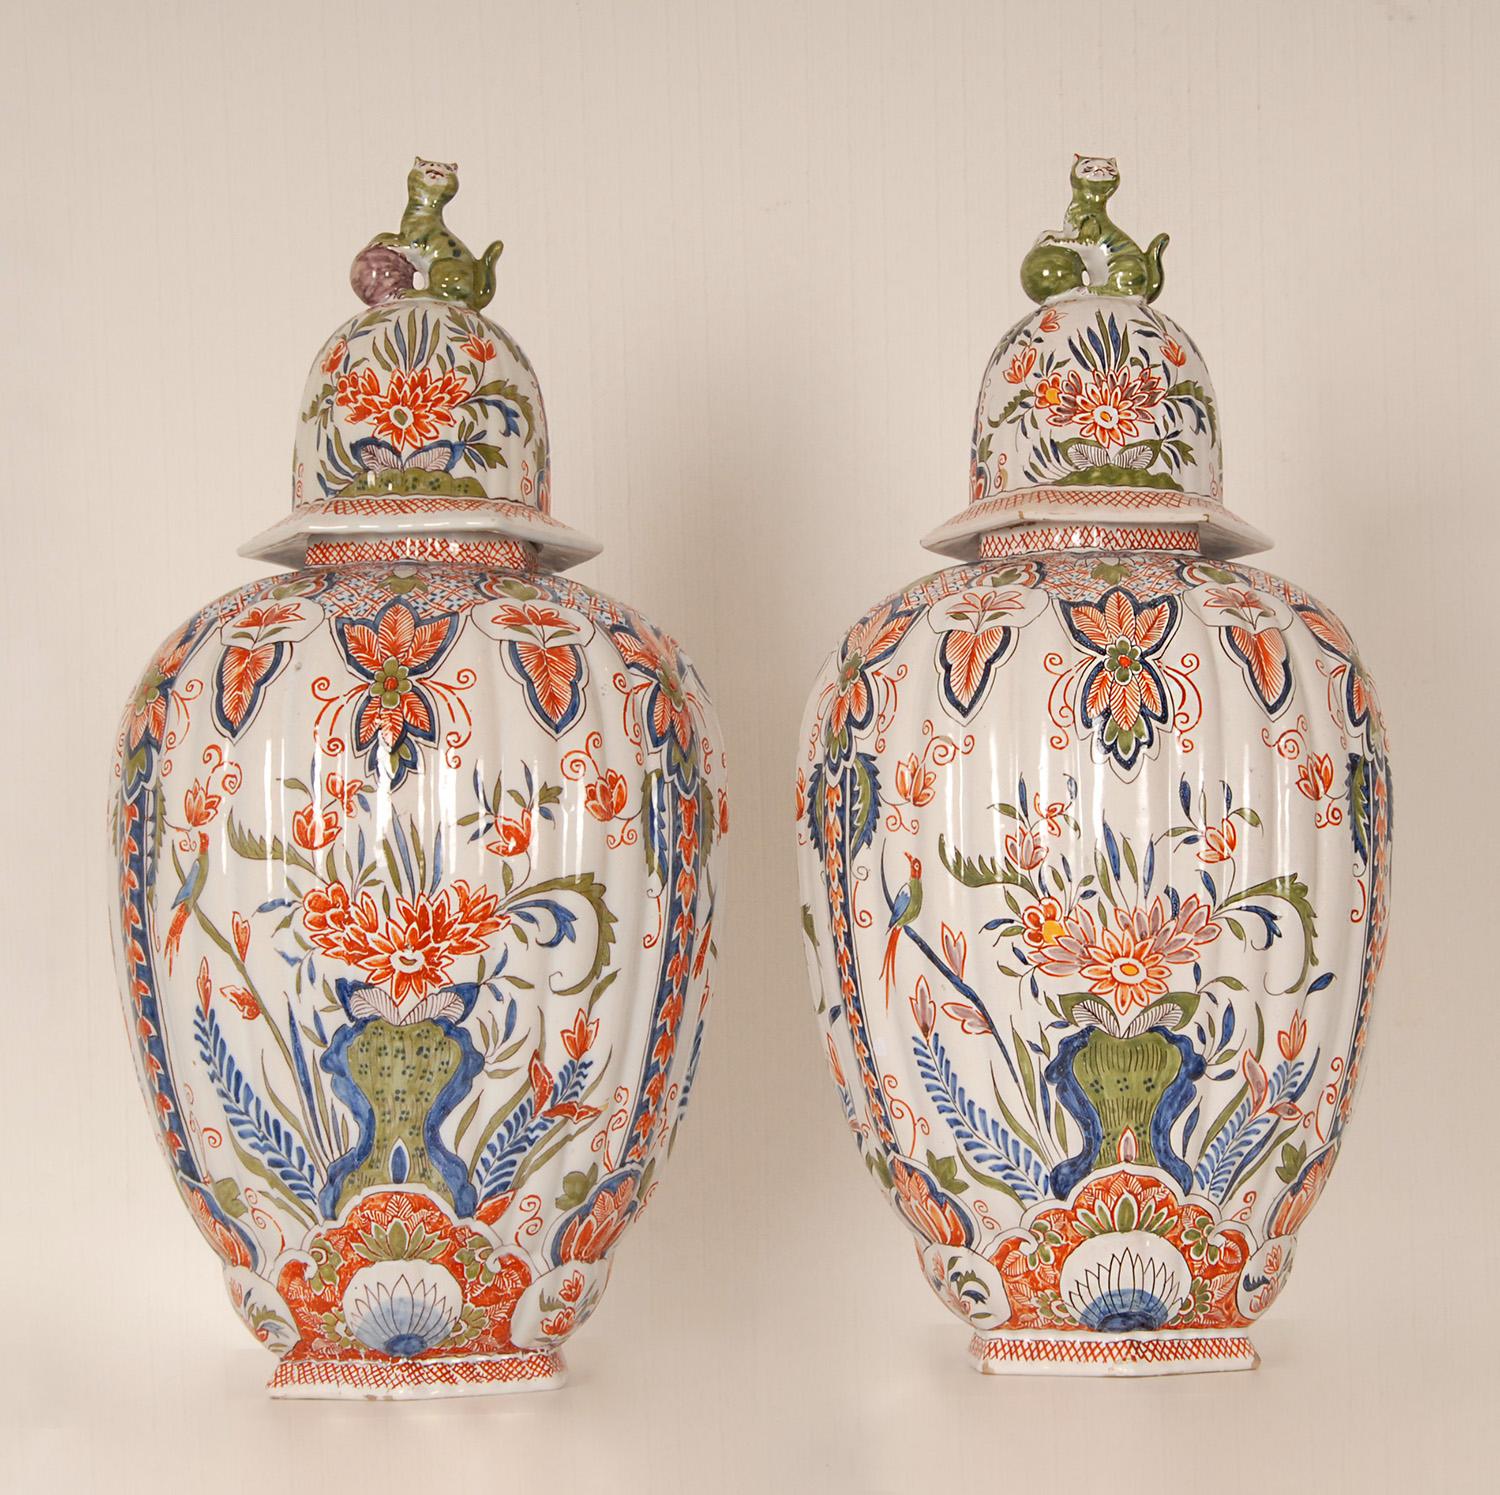 A pair antique Delft vases - Covered Delftware Urns.
Tall decorative covered baluster vases on an octagonal foot.
The ovoid body with four elongated panels painted in blue, iron-red and green with different scenes of exotic bird perched on flowering